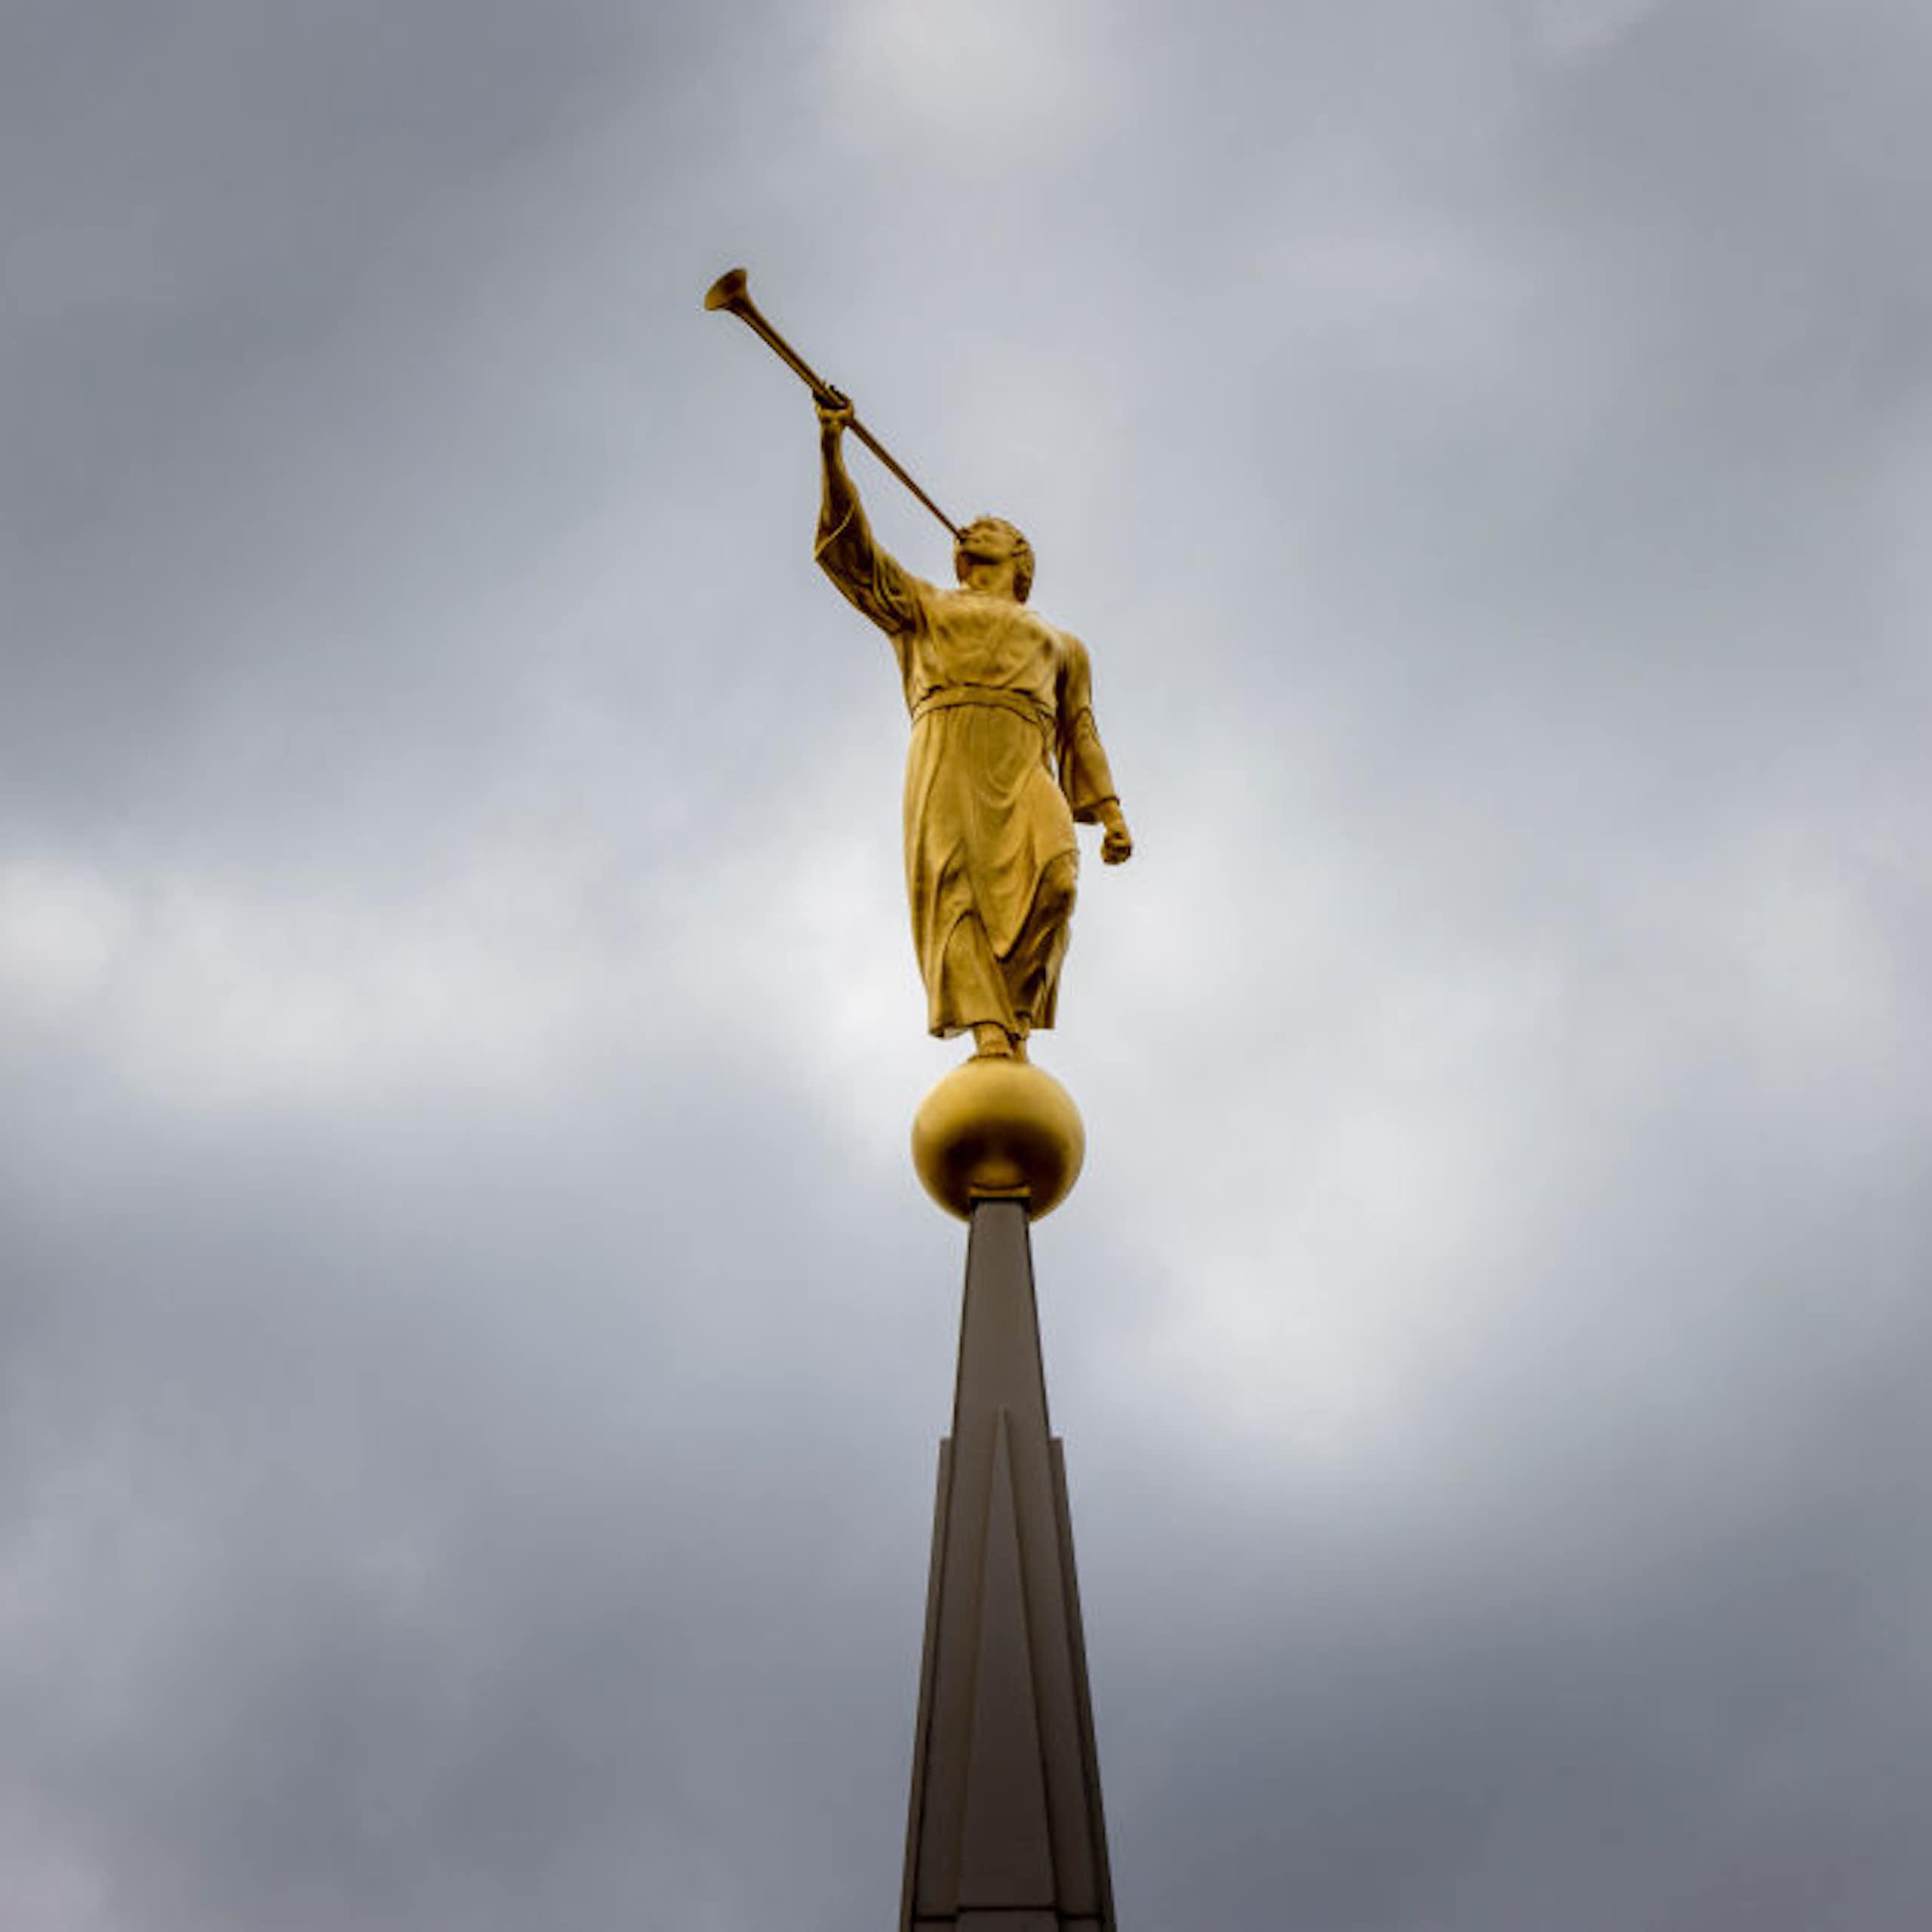 A golden statue of a man in a robe blowing a trumpet atop a steeple, seen against a gray sky.